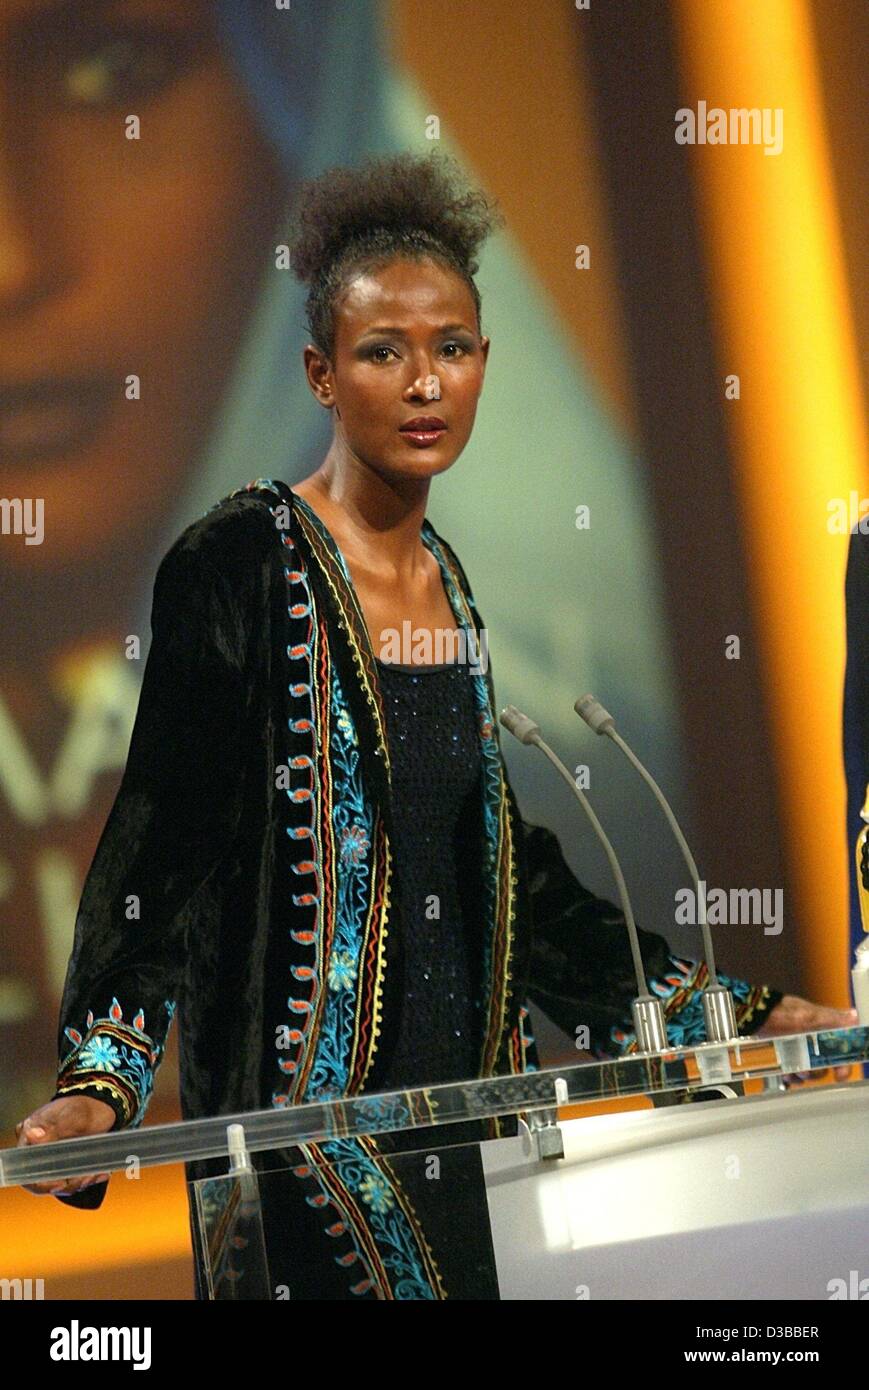 (dpa) - Former top model Waris Dirie from Somalia, pictured at an award show in Munich, 6 November 2002. Waris Dirie was awarded the International Book Prize Corine 2002 for her autobiography 'Desert Flower: The Extraordinary Journey of a Desert Nomad'. Waris Dirie is a UN ambassador and fights agai Stock Photo